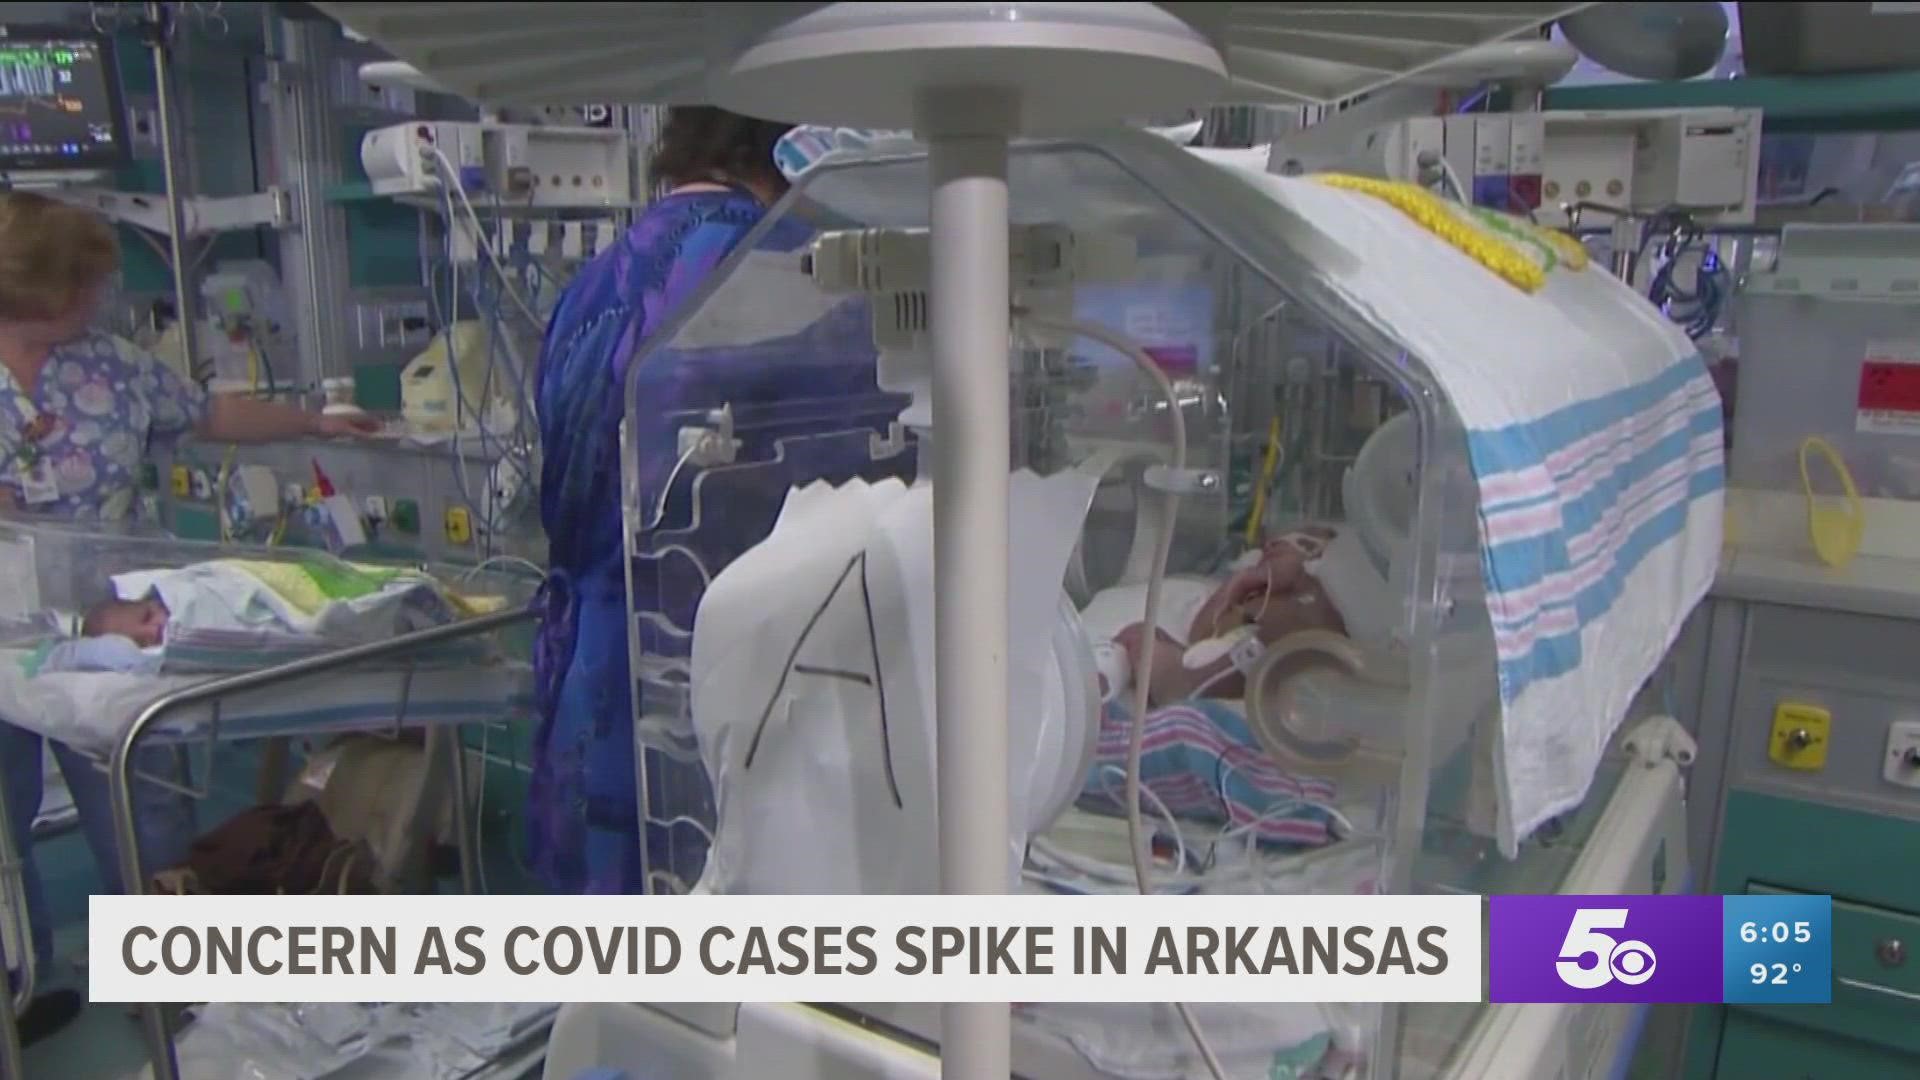 With the surge in COVID-19 cases, Baptist Health is adding more ICU beds to accommodate the growing number of adult patients and babies in the neonatal unit.